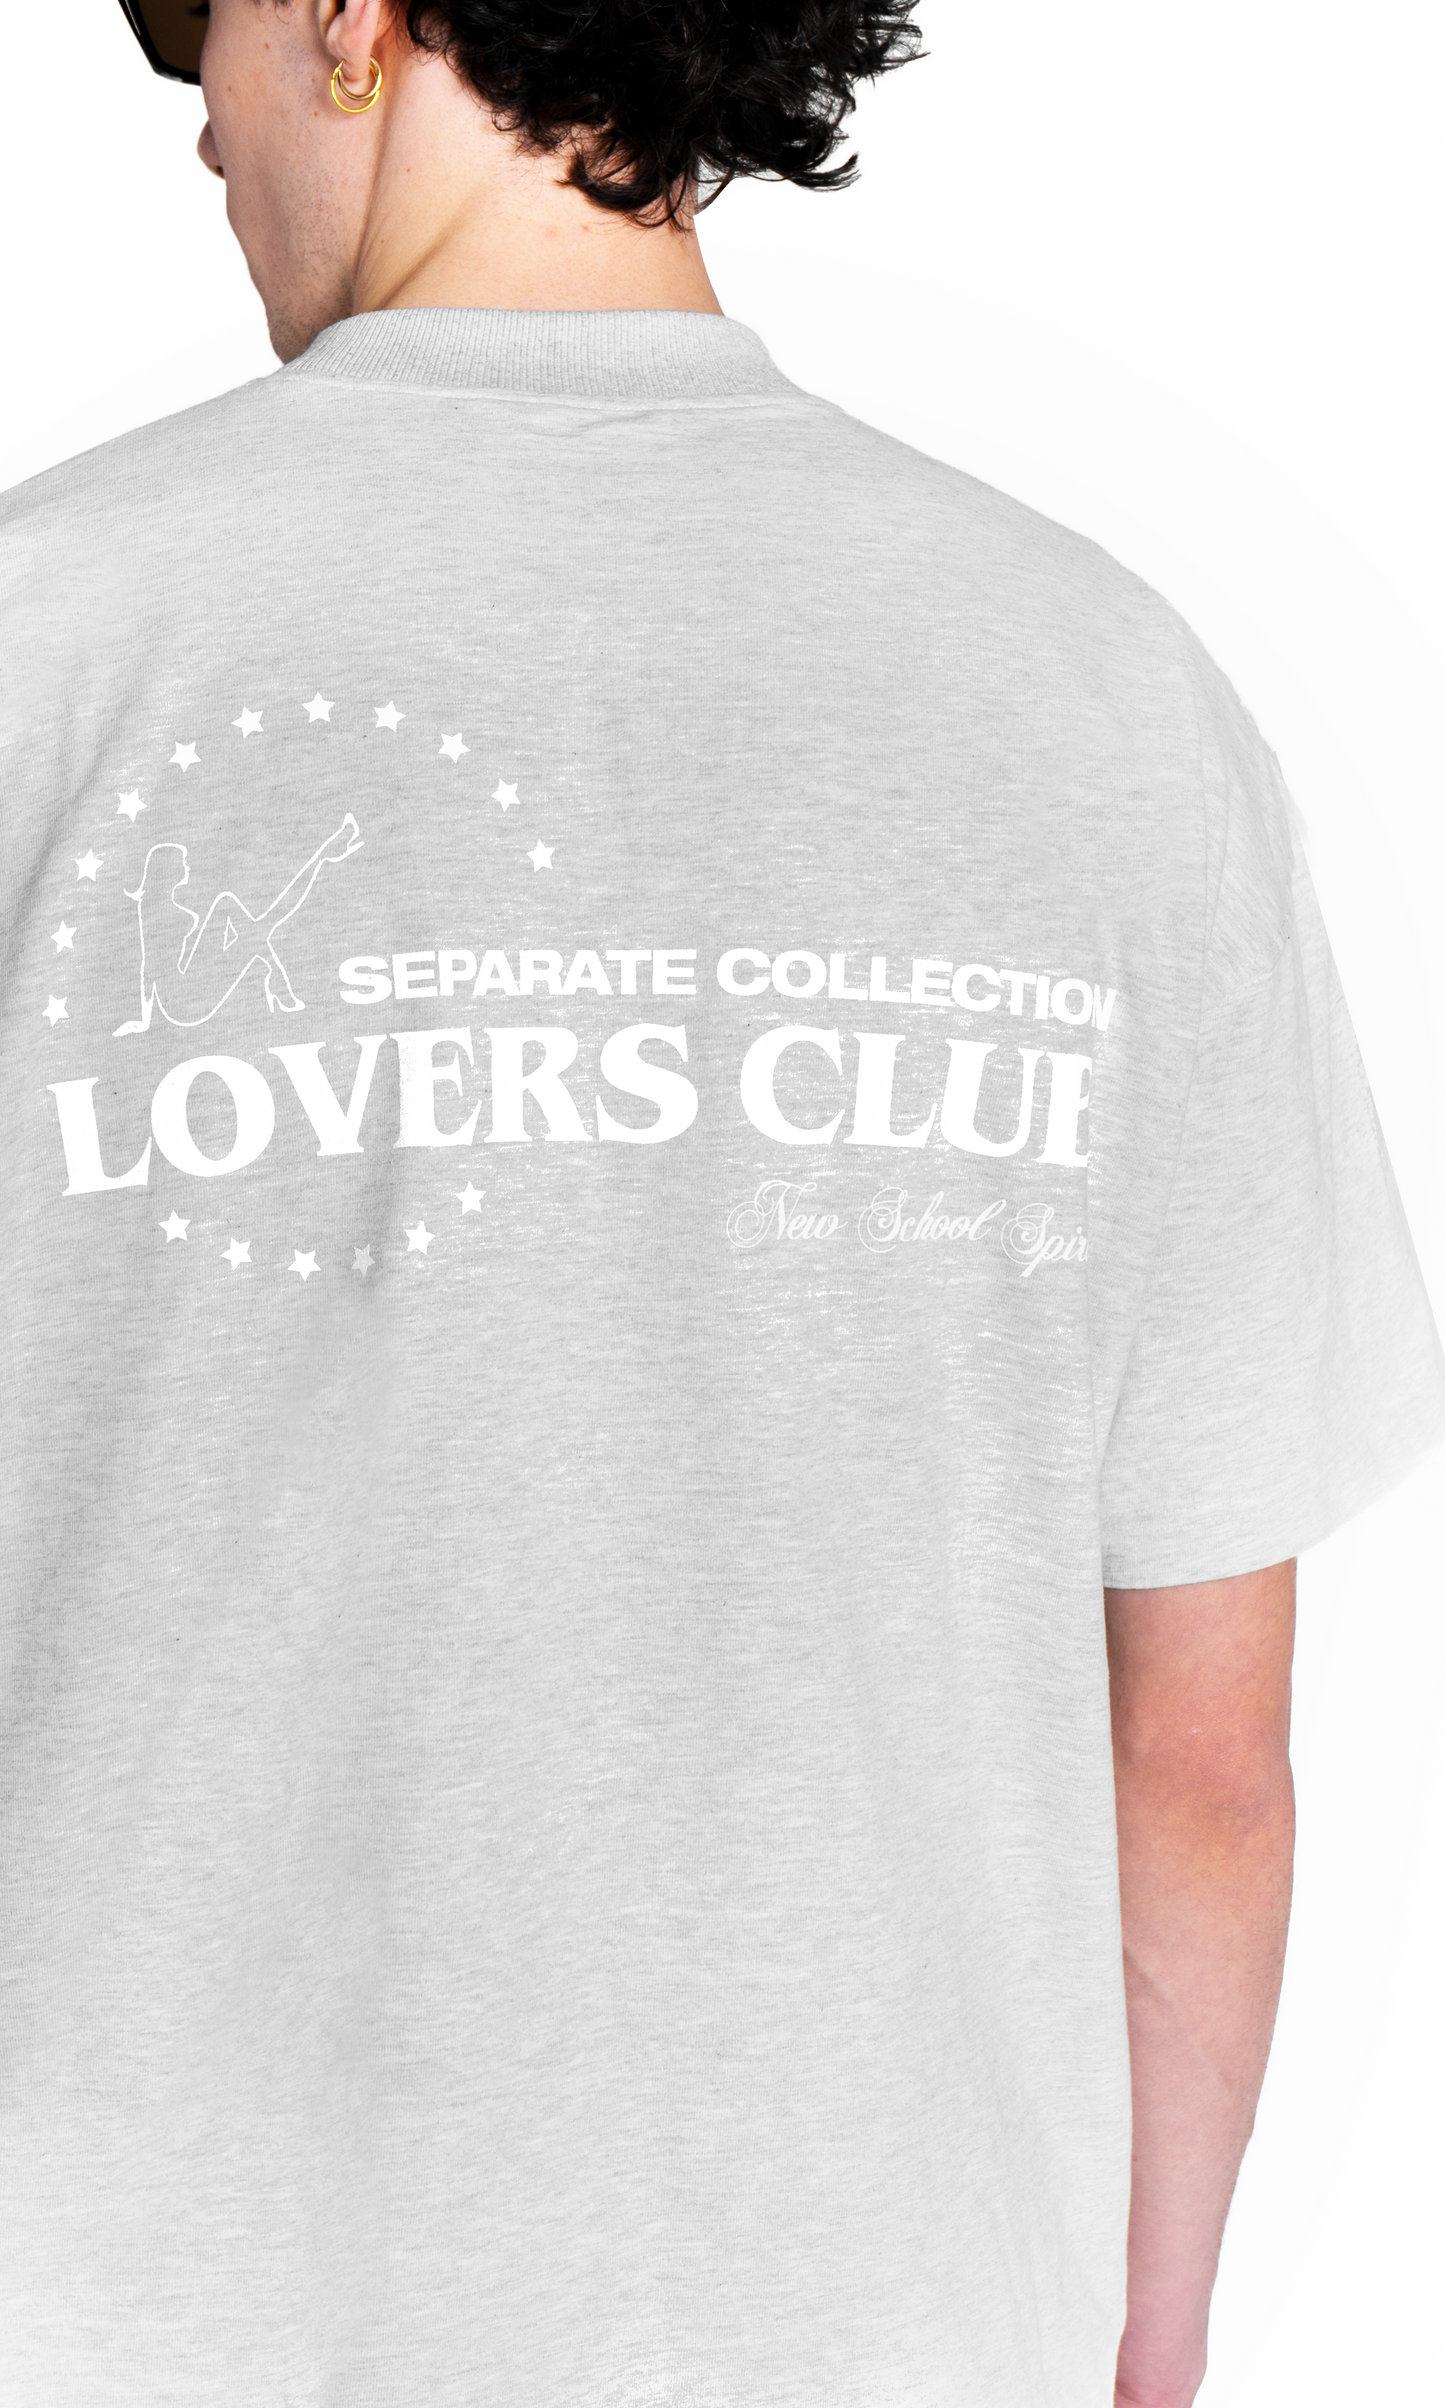 Separate Collection© Lovers Club T-Shirt